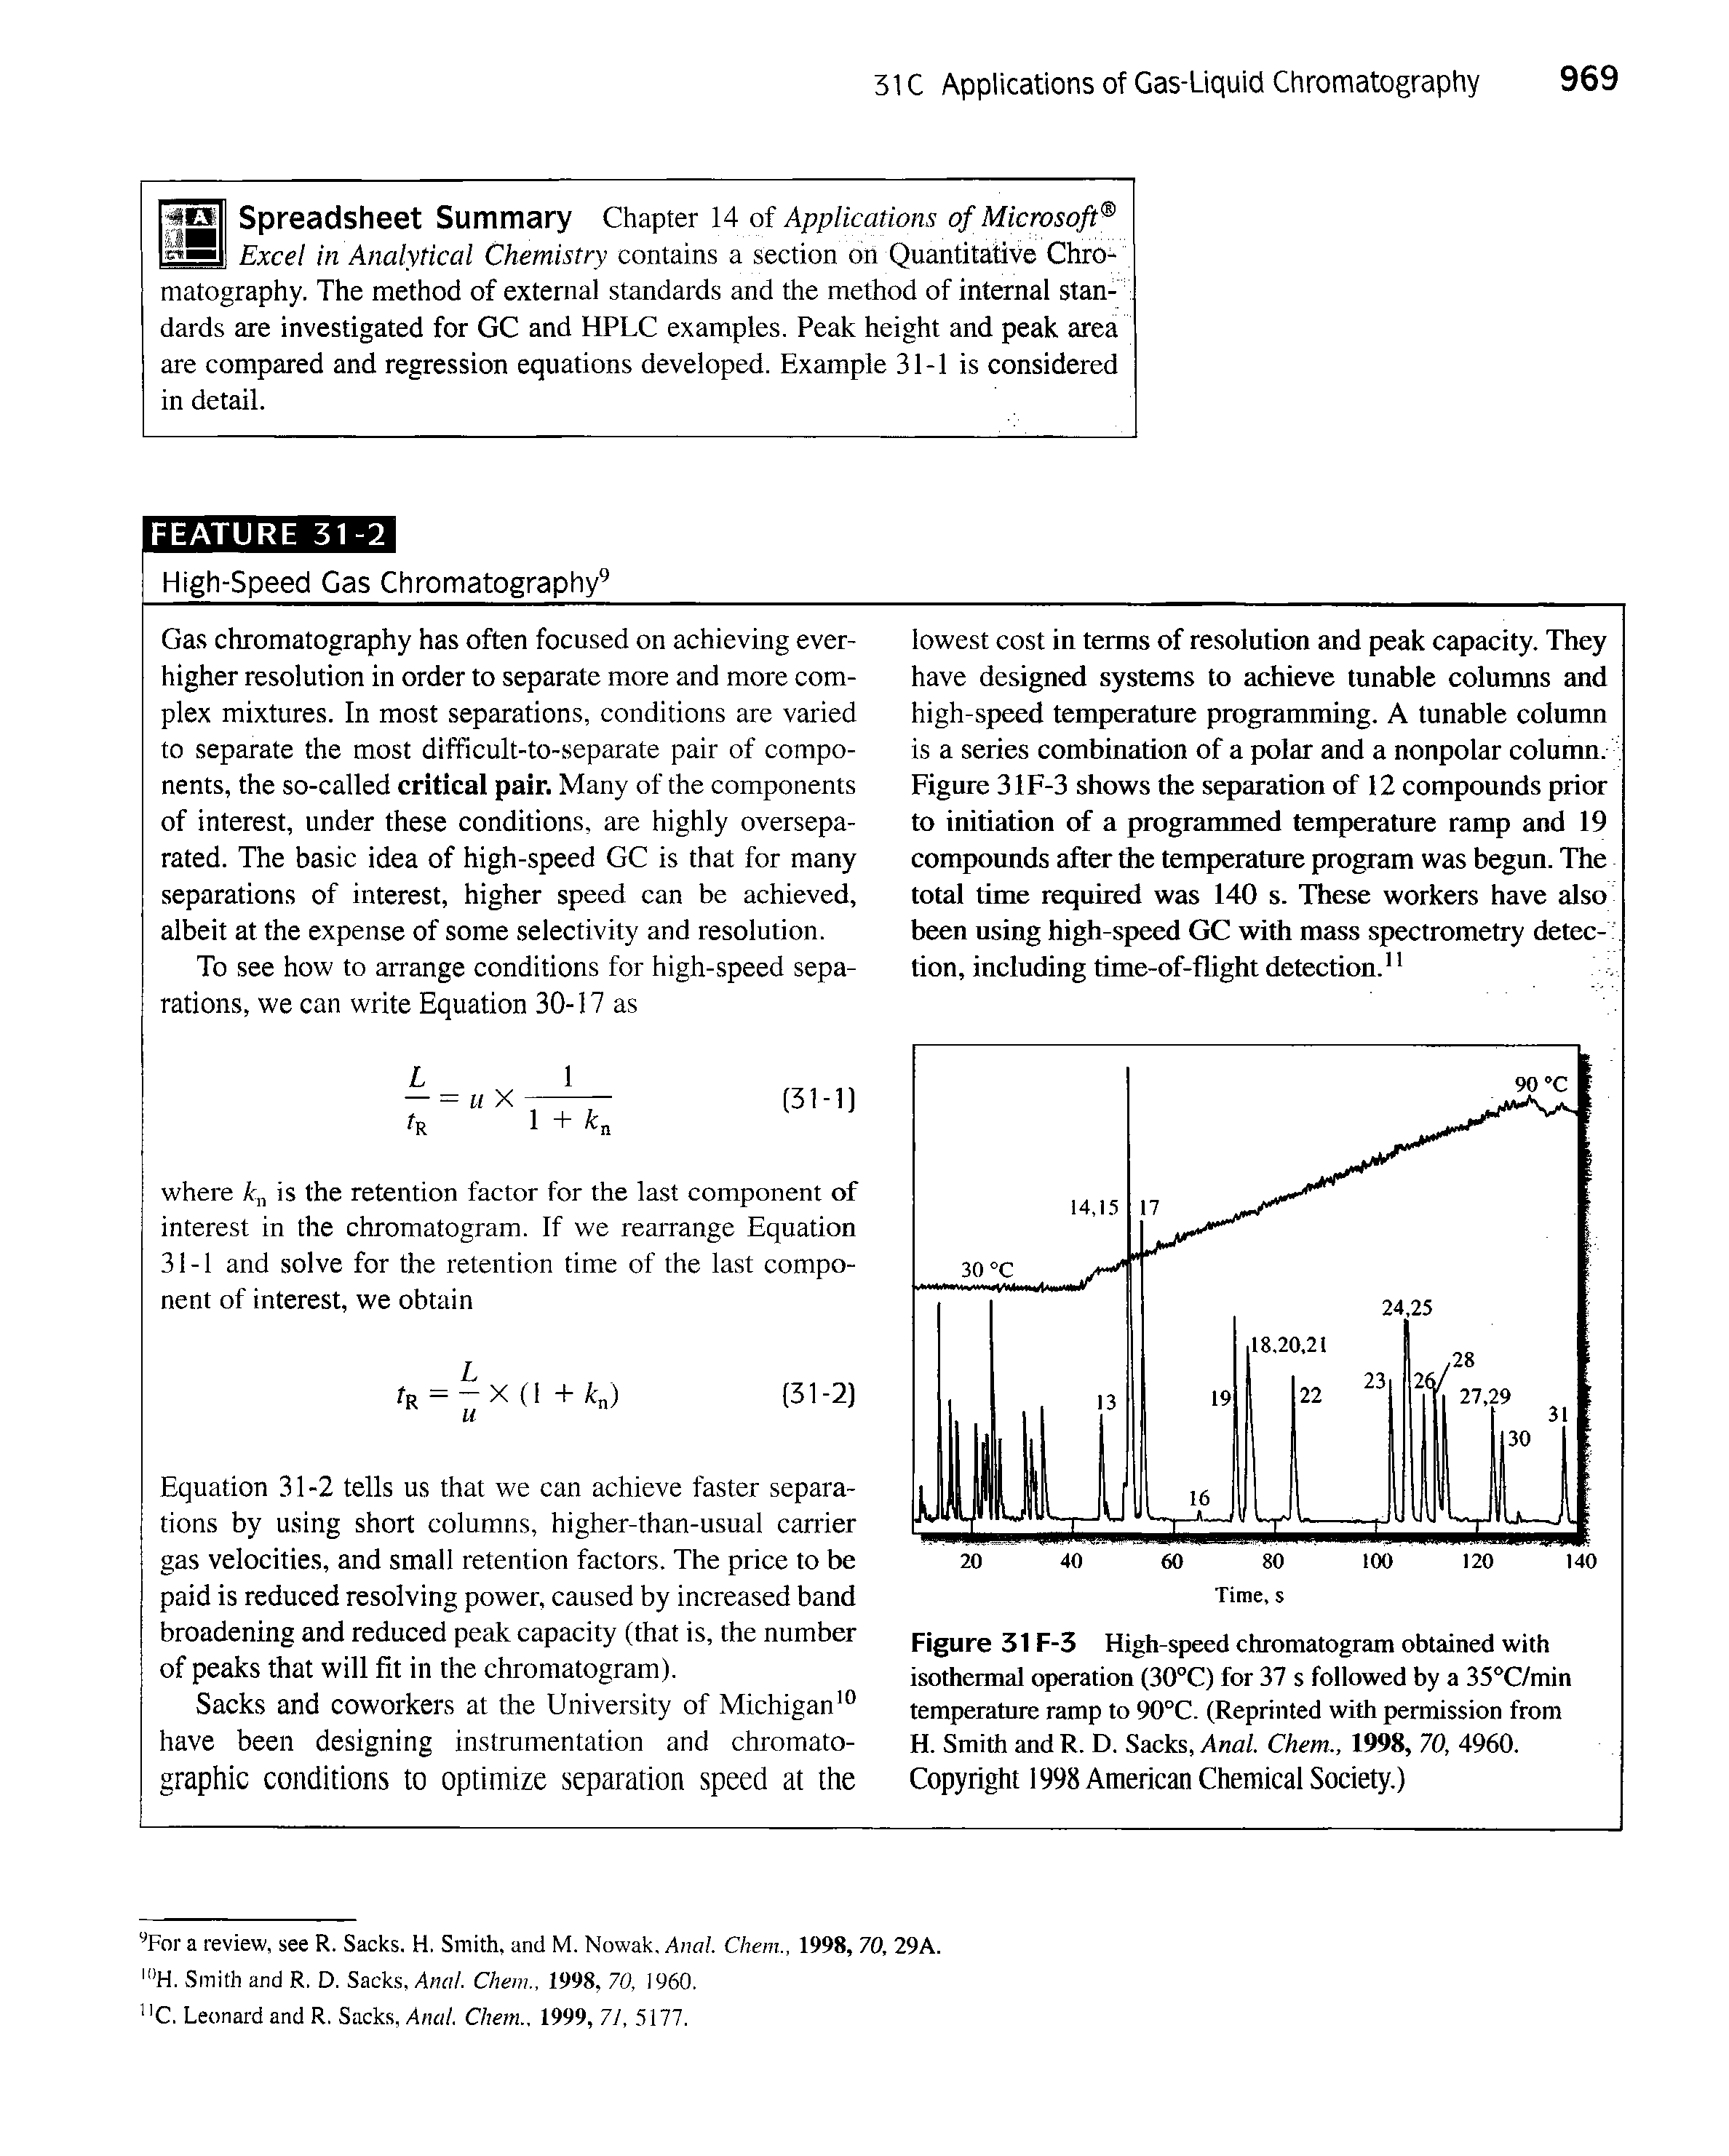 Figure 31 F-3 High-speed chromatogram obtained with isothermal operation (30°C) for 37 s followed by a 35 C/min temperature ramp to 90°C. (Reprinted with permission from H. Smith and R. D. Sacks, Anal. Chem., 1998, 70, 4960. Copyright 1998 American Chemical Society.)...